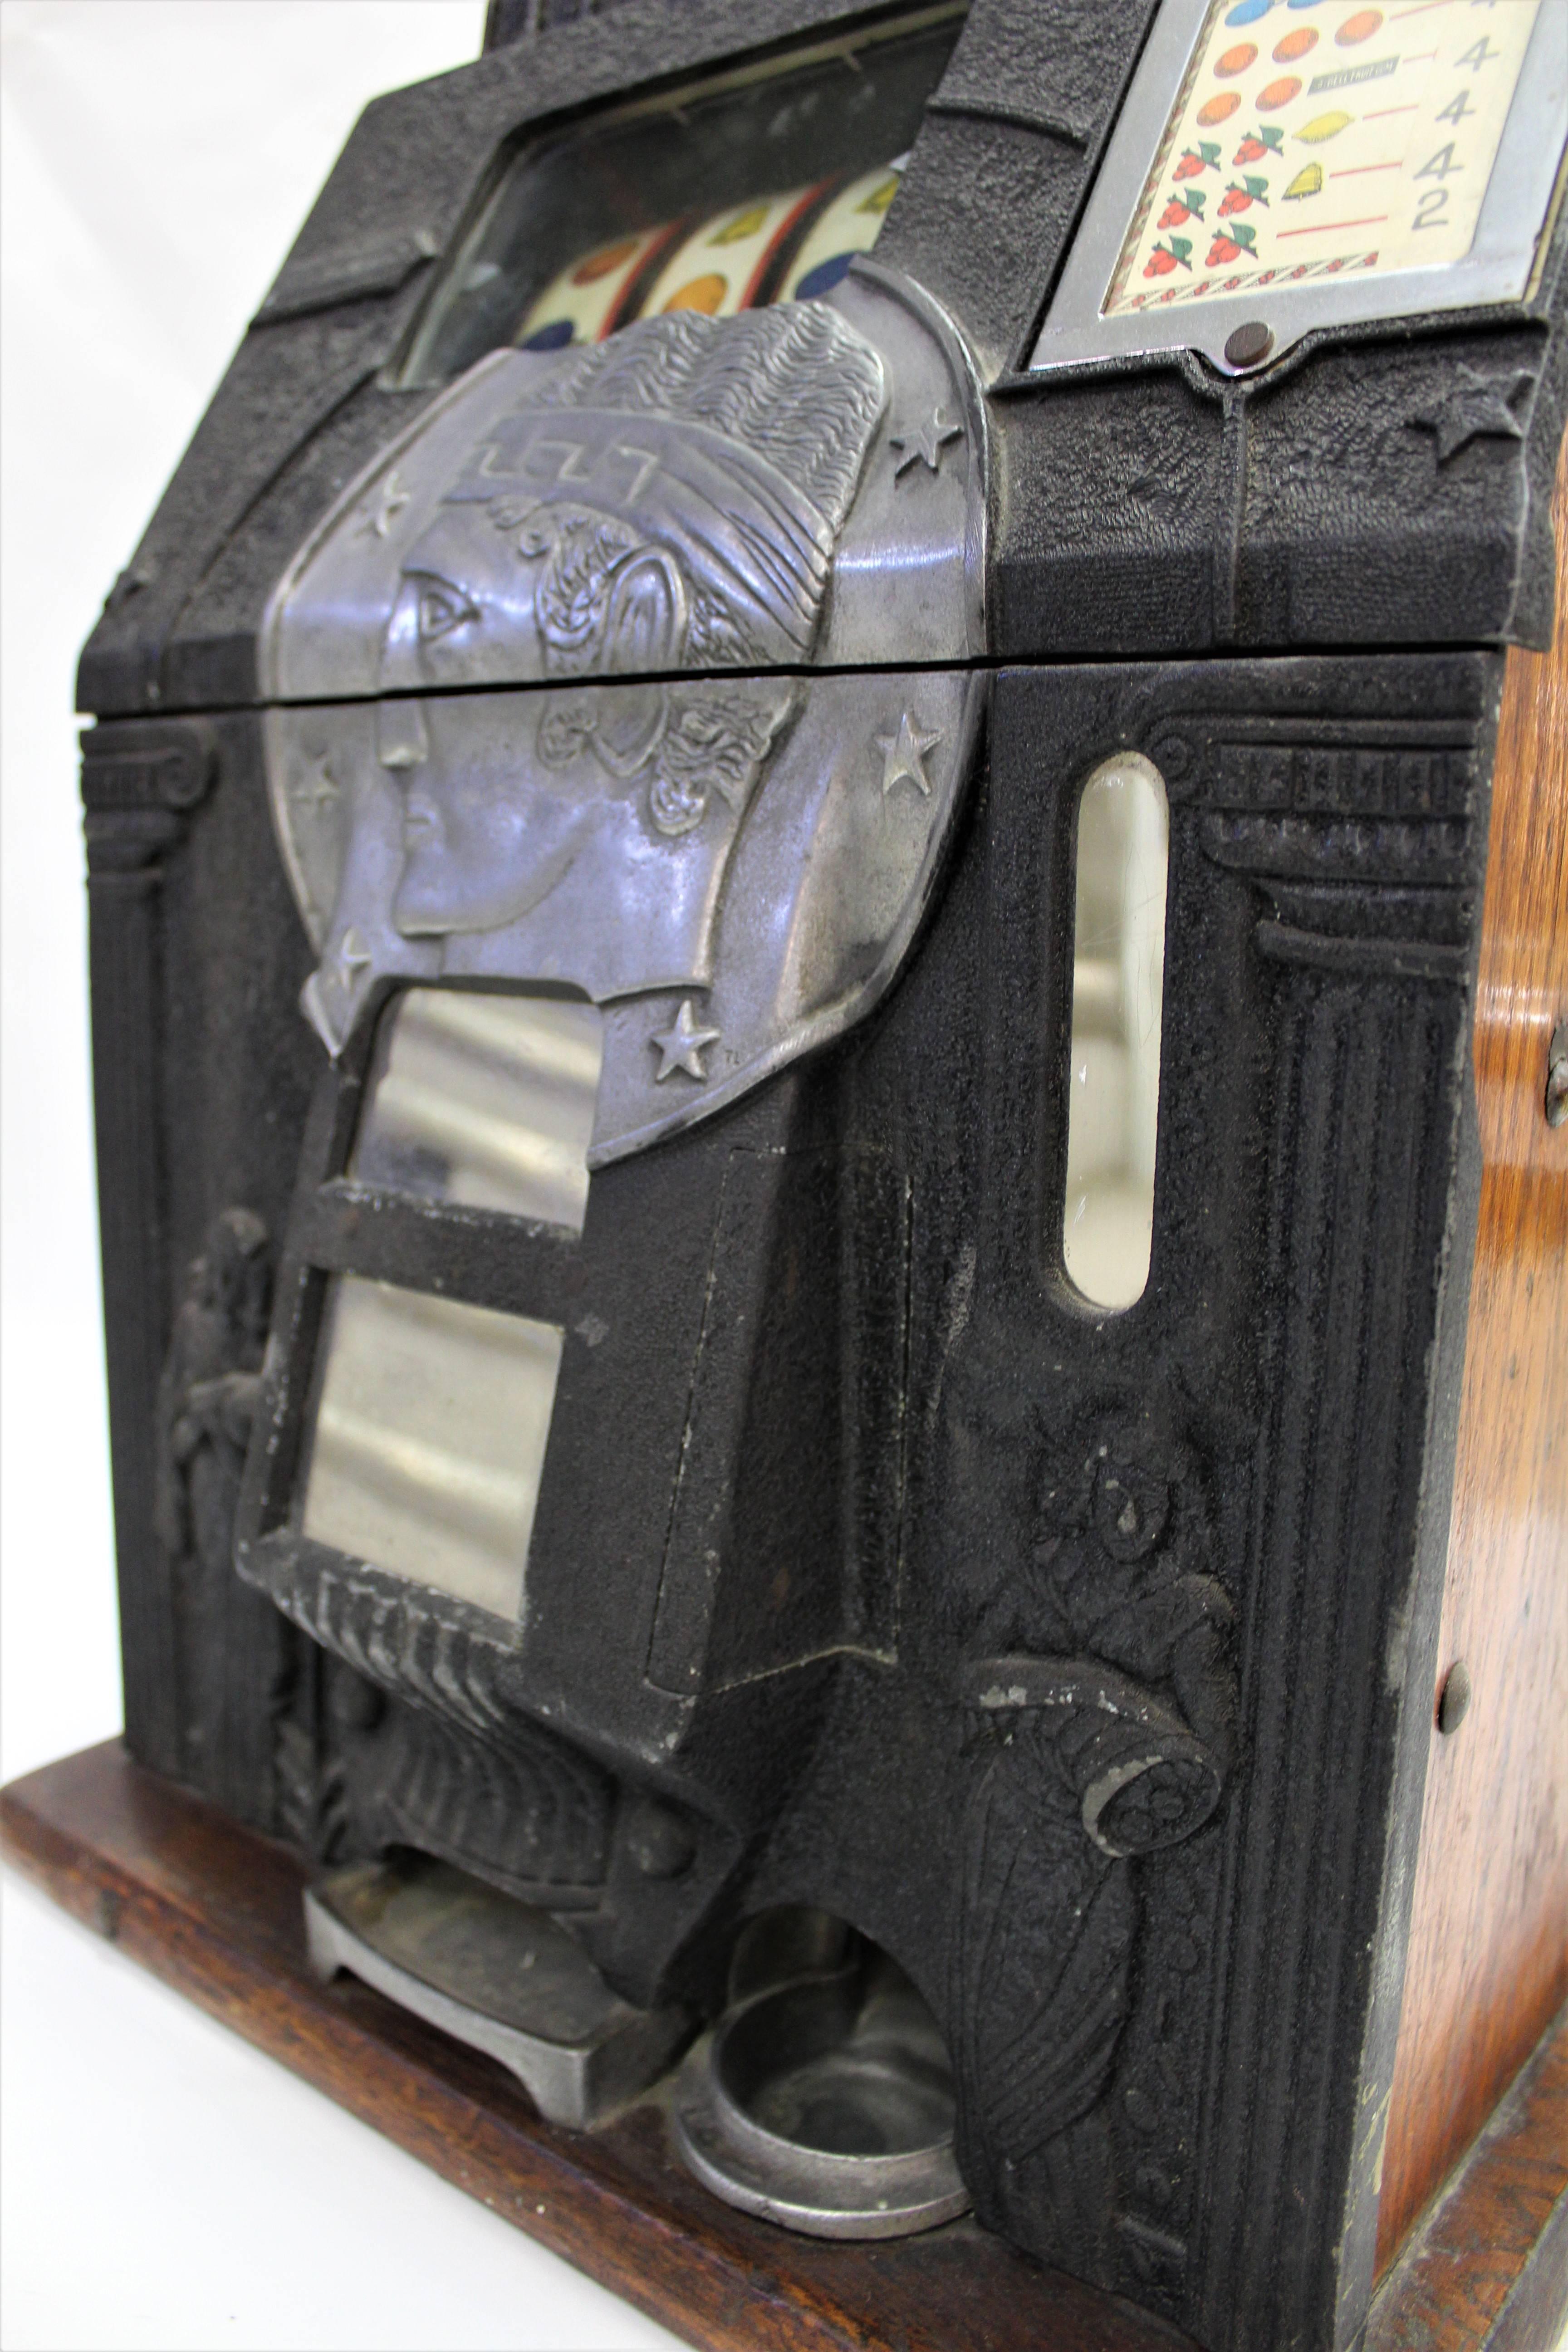 Mid-20th Century Bell Fruit Gum Company British Coin Operated Slot Machine Watling